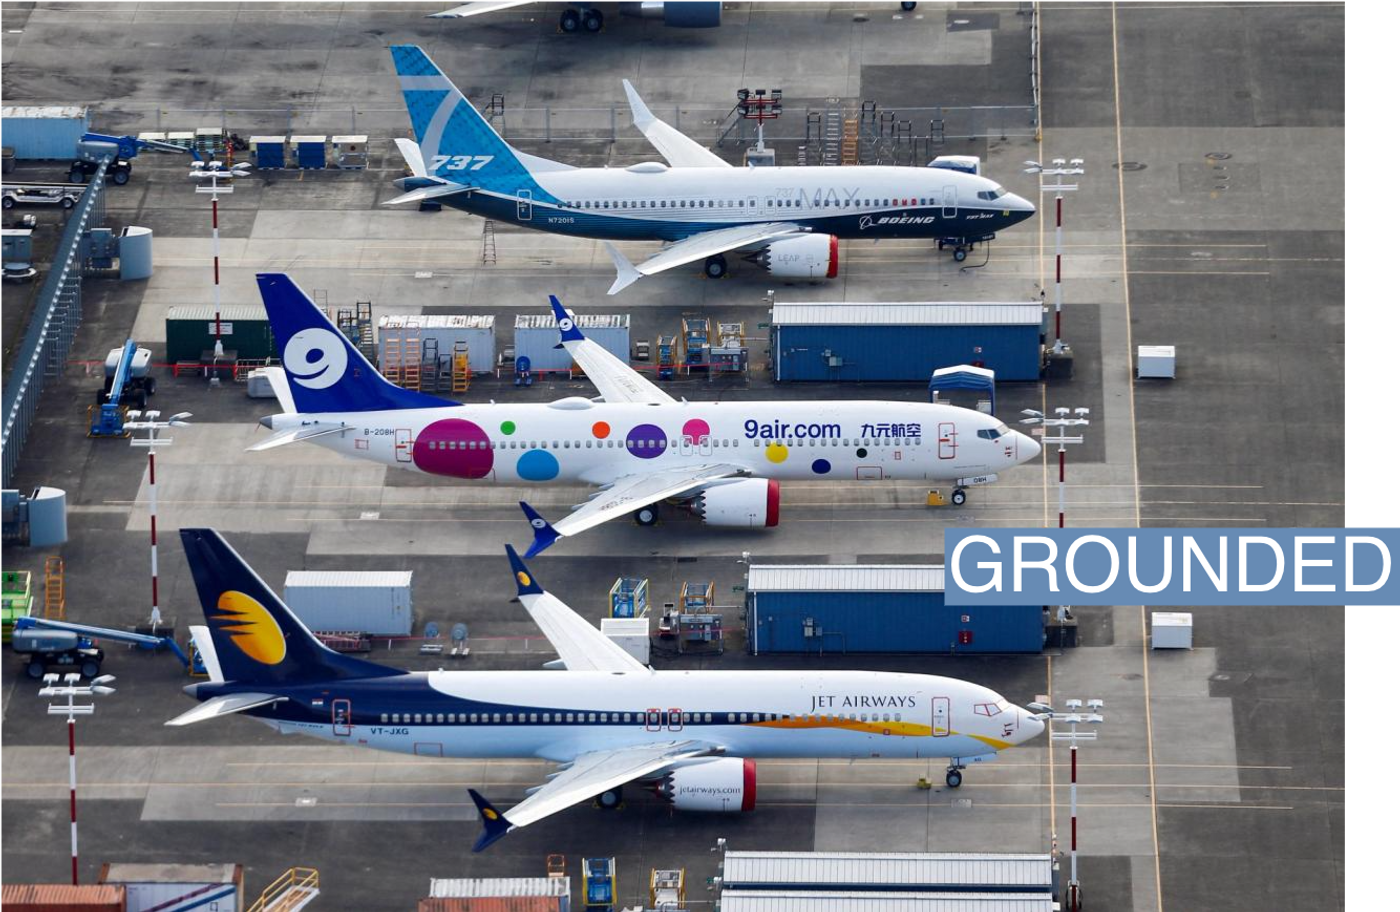 FILE PHOTO: An aerial photo shows Jet Airways and 9 Air Boeing 737 MAX airplanes, as well as a 737 MAX 7, grounded at Boeing Field in Seattle, Washington, U.S. March 21, 2019. REUTERS/Lindsey Wasson/File Photo